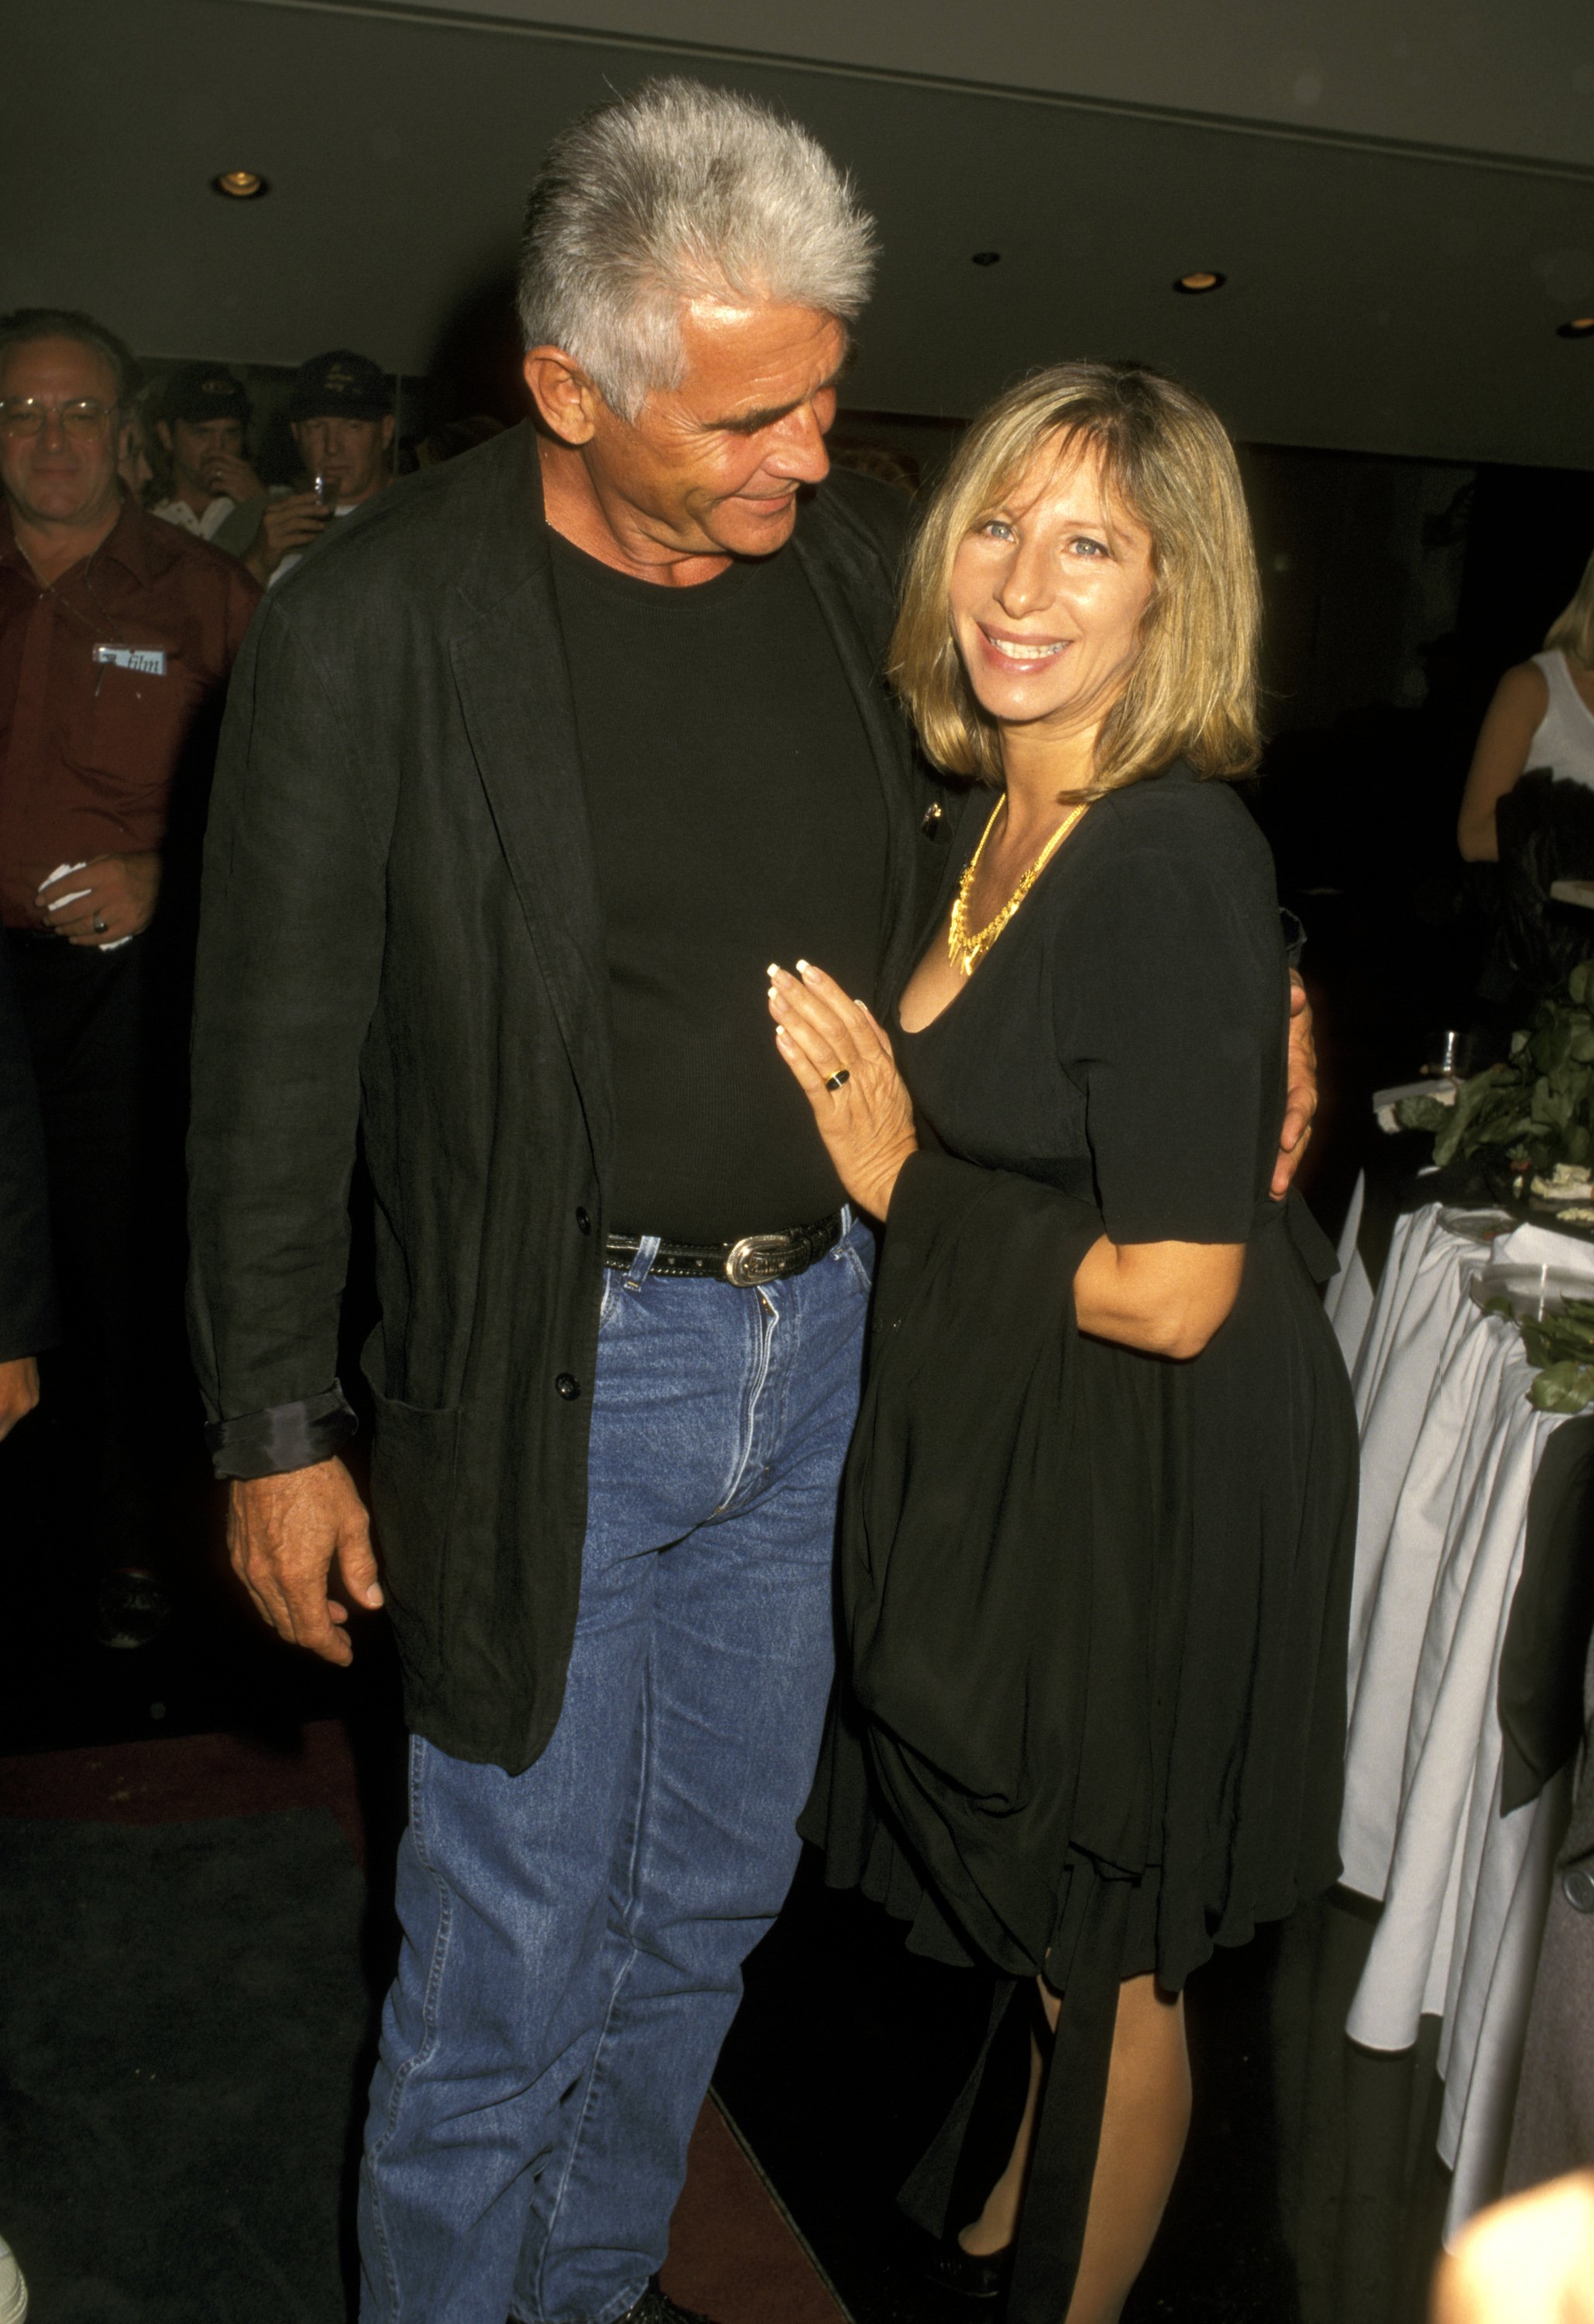 James Brolin and Barbra Streisand during the Screening of "My Brother's War" at Hitchcock Theater in Los Angeles. | Source: Getty Images